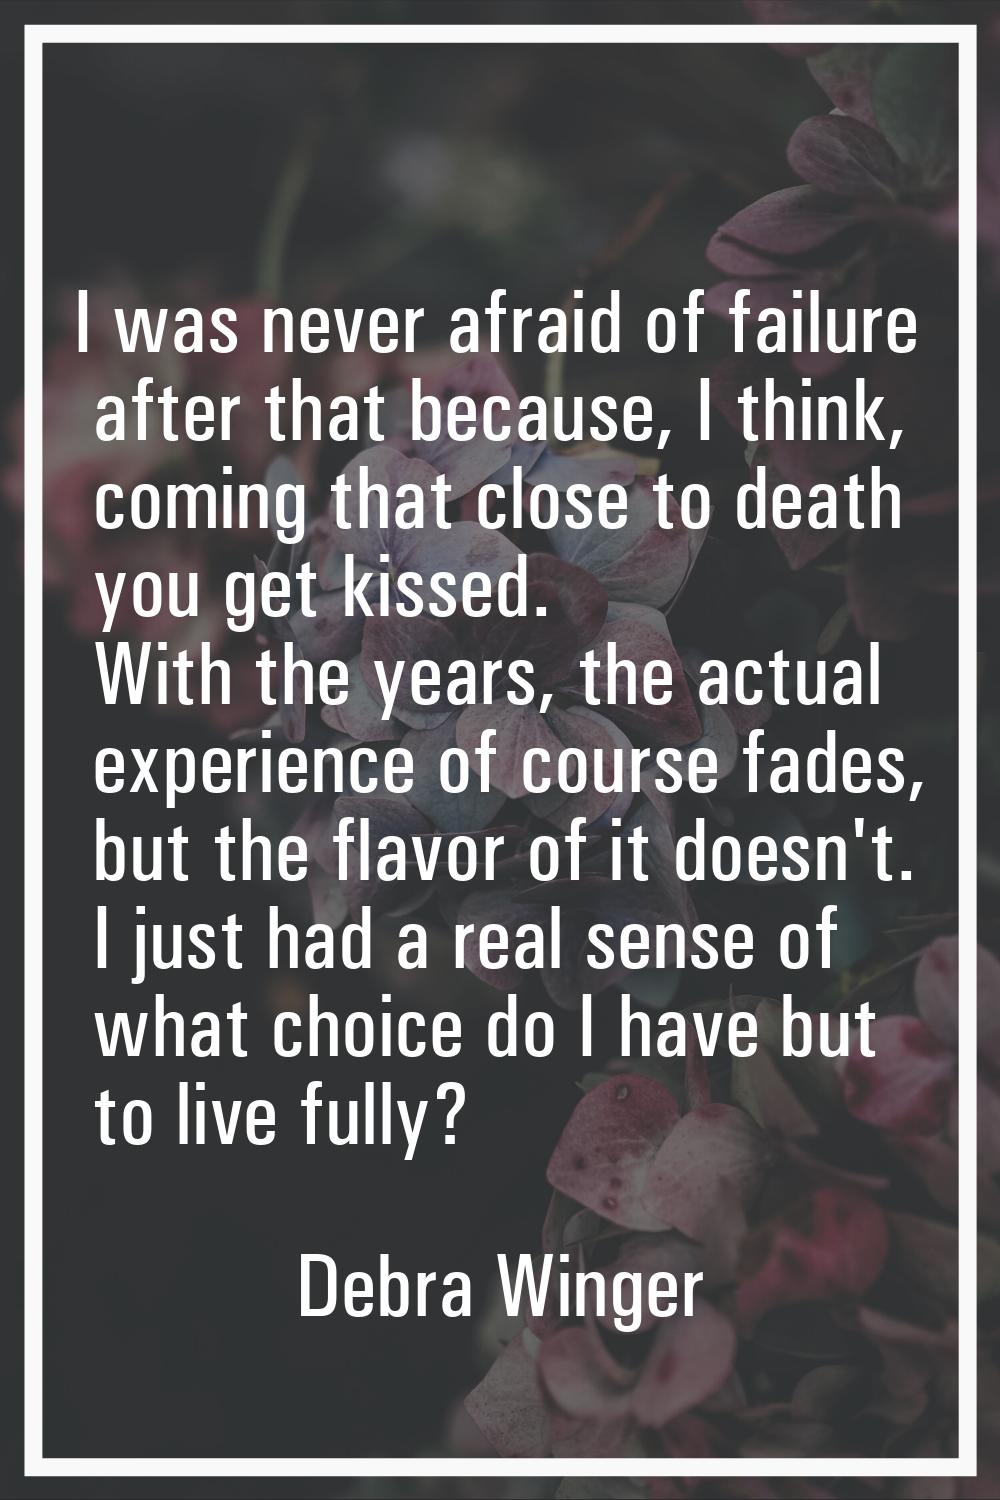 I was never afraid of failure after that because, I think, coming that close to death you get kisse